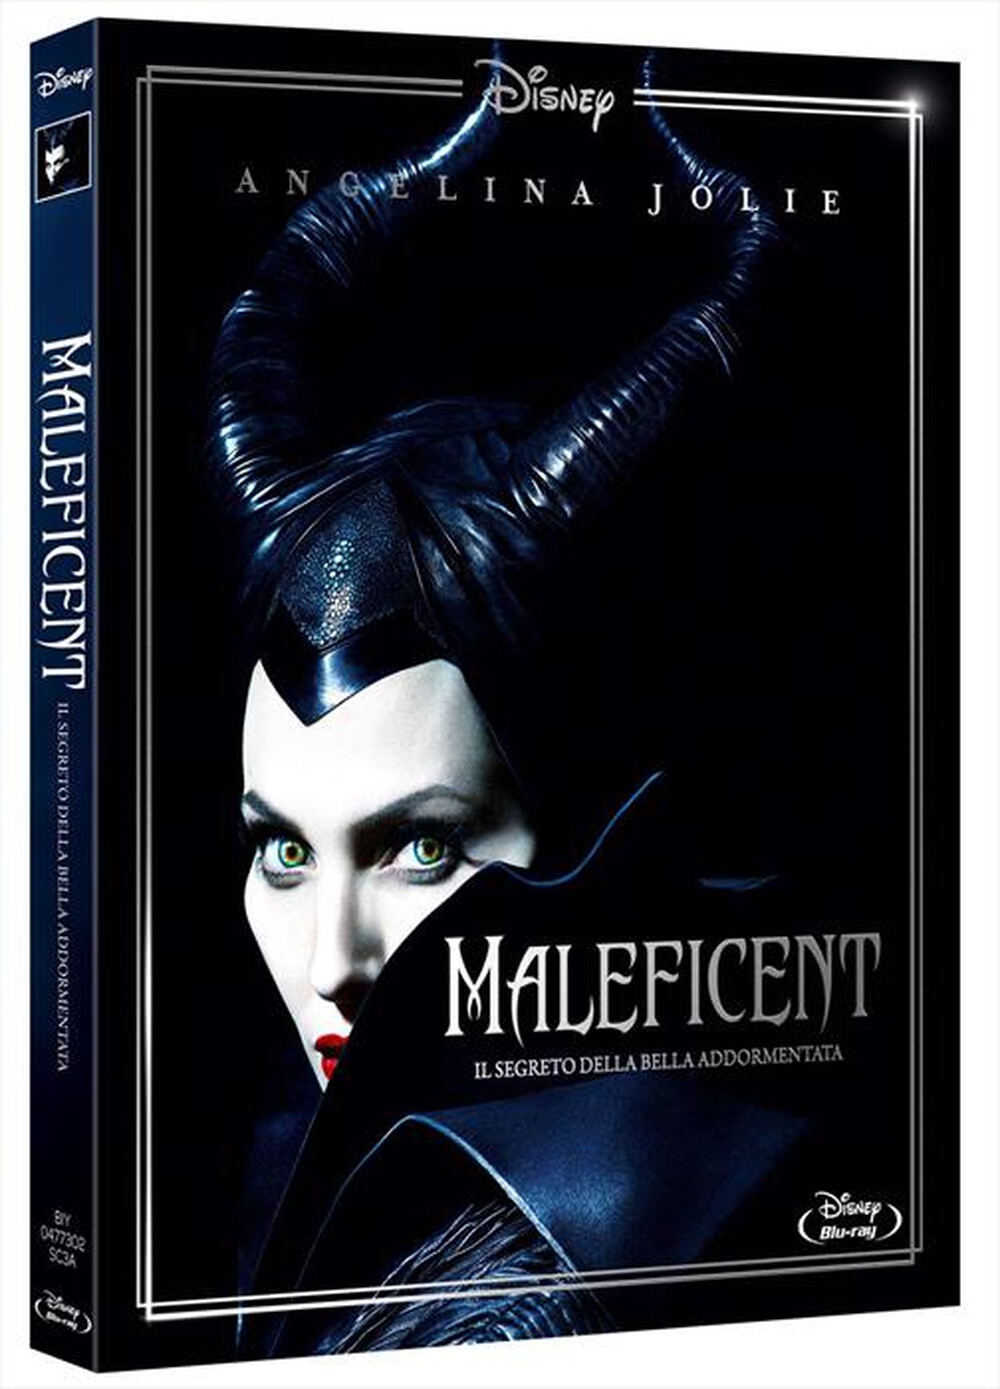 "EAGLE PICTURES - Maleficent (New Edition)"